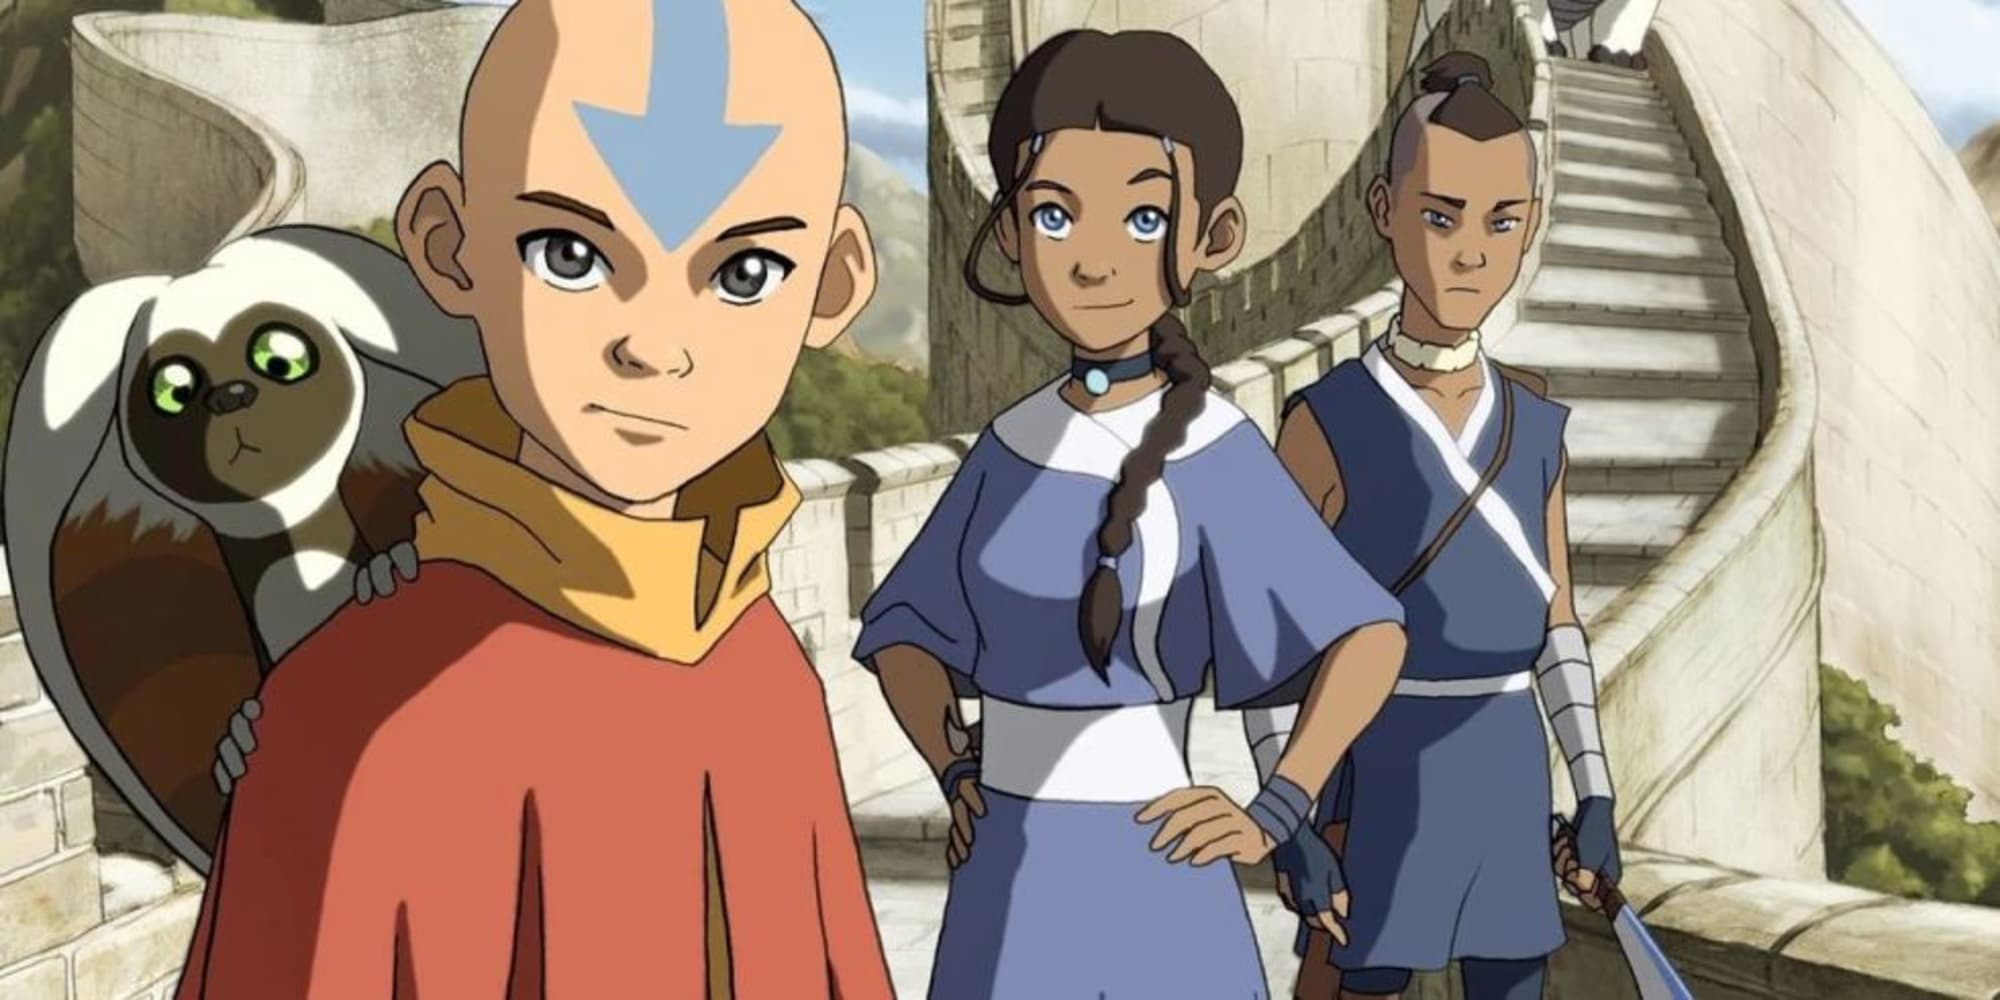 The 10 best episodes of Avatar: the Last Airbender, ranked